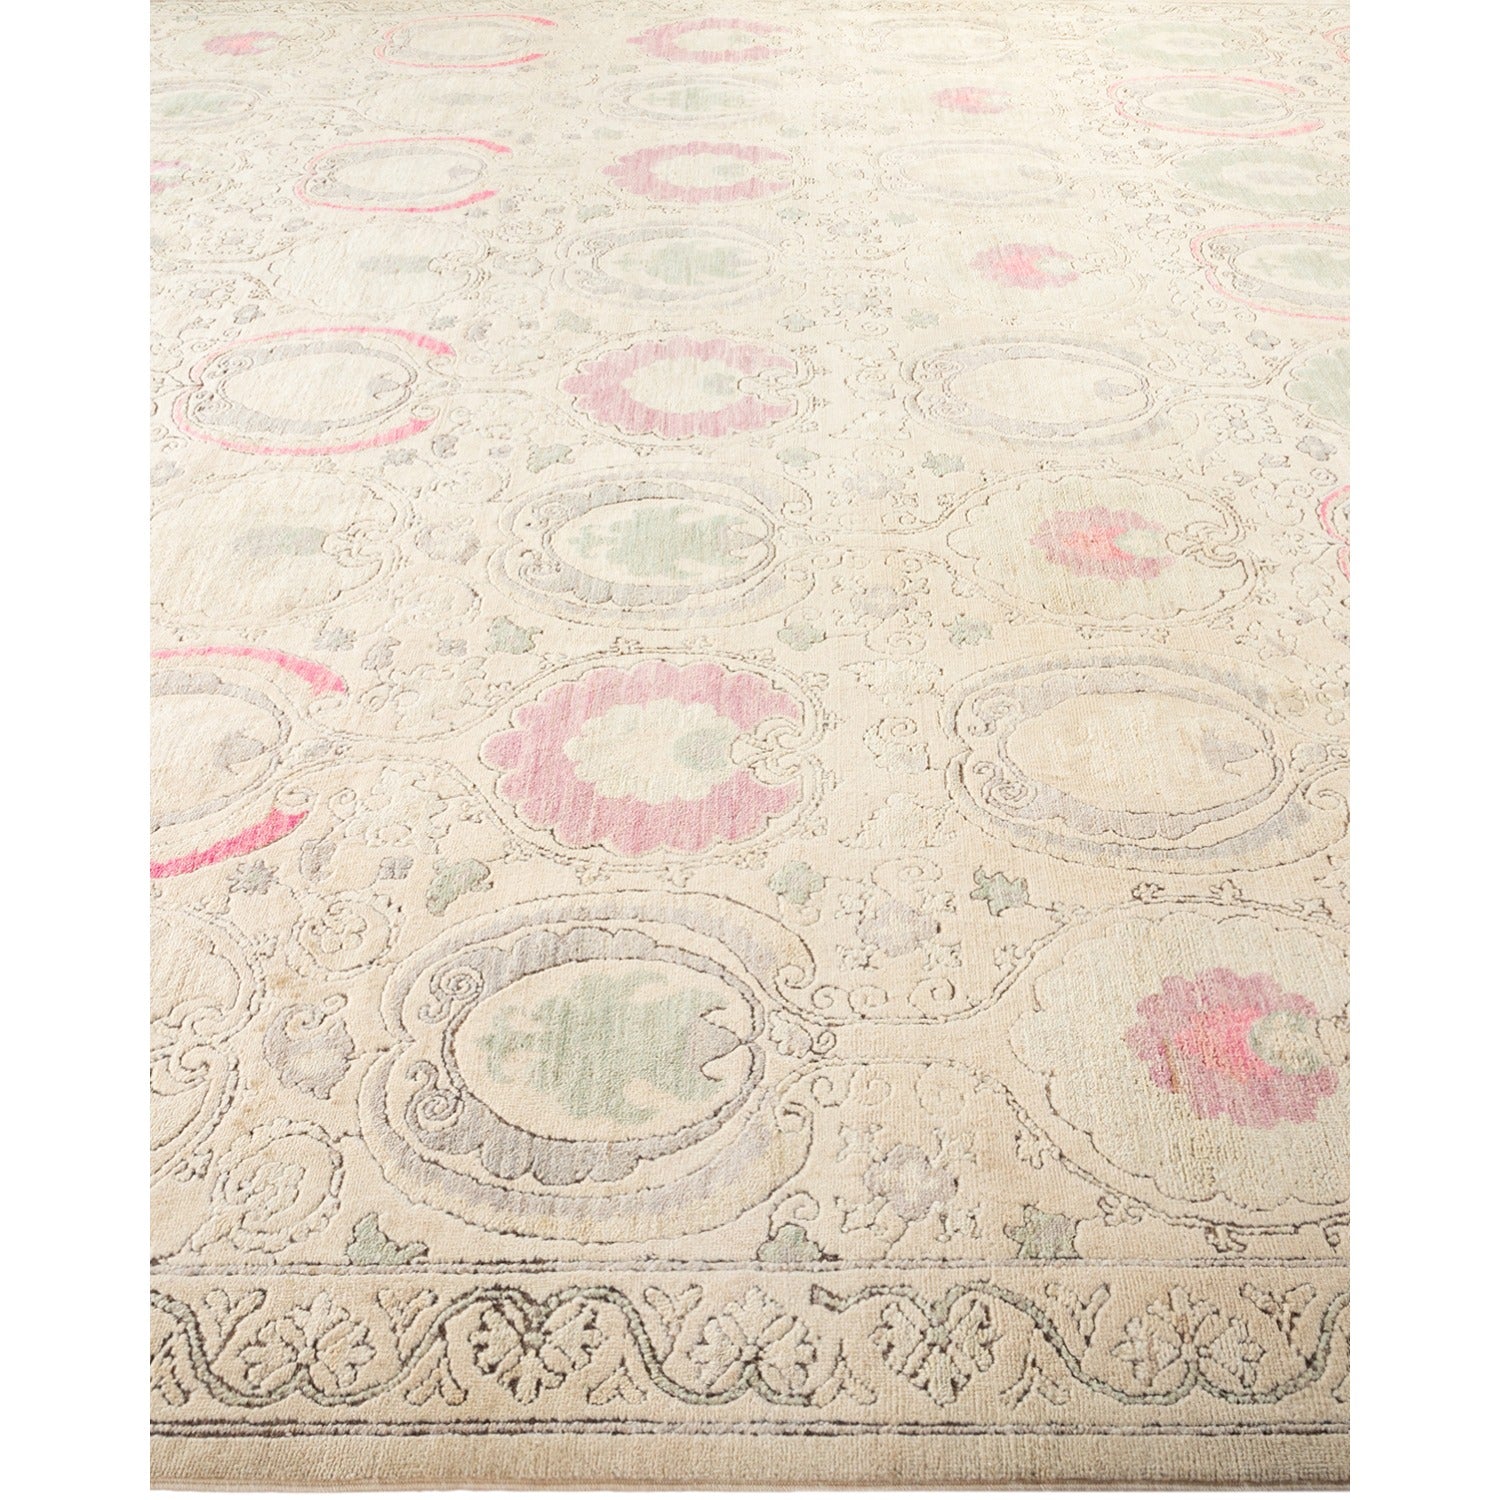 Vintage-inspired carpet with floral medallions in green and pink.